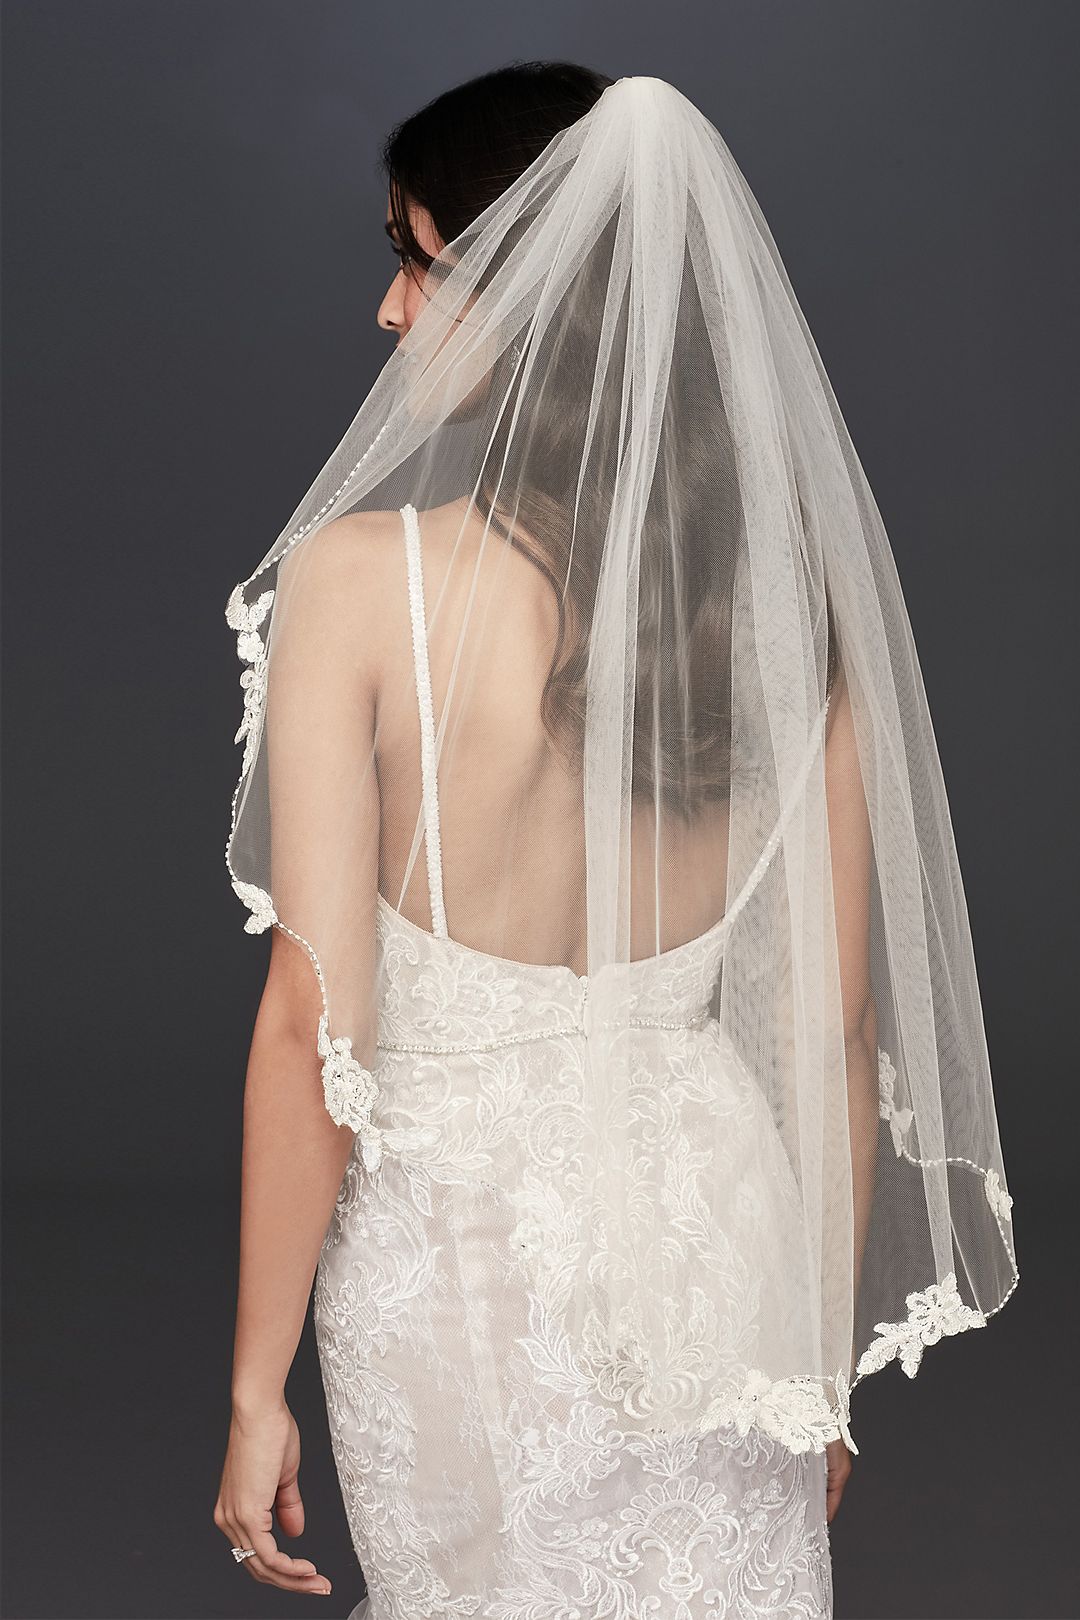 Floral Lace and Crystal Trimmed Elbow Length Veil Image